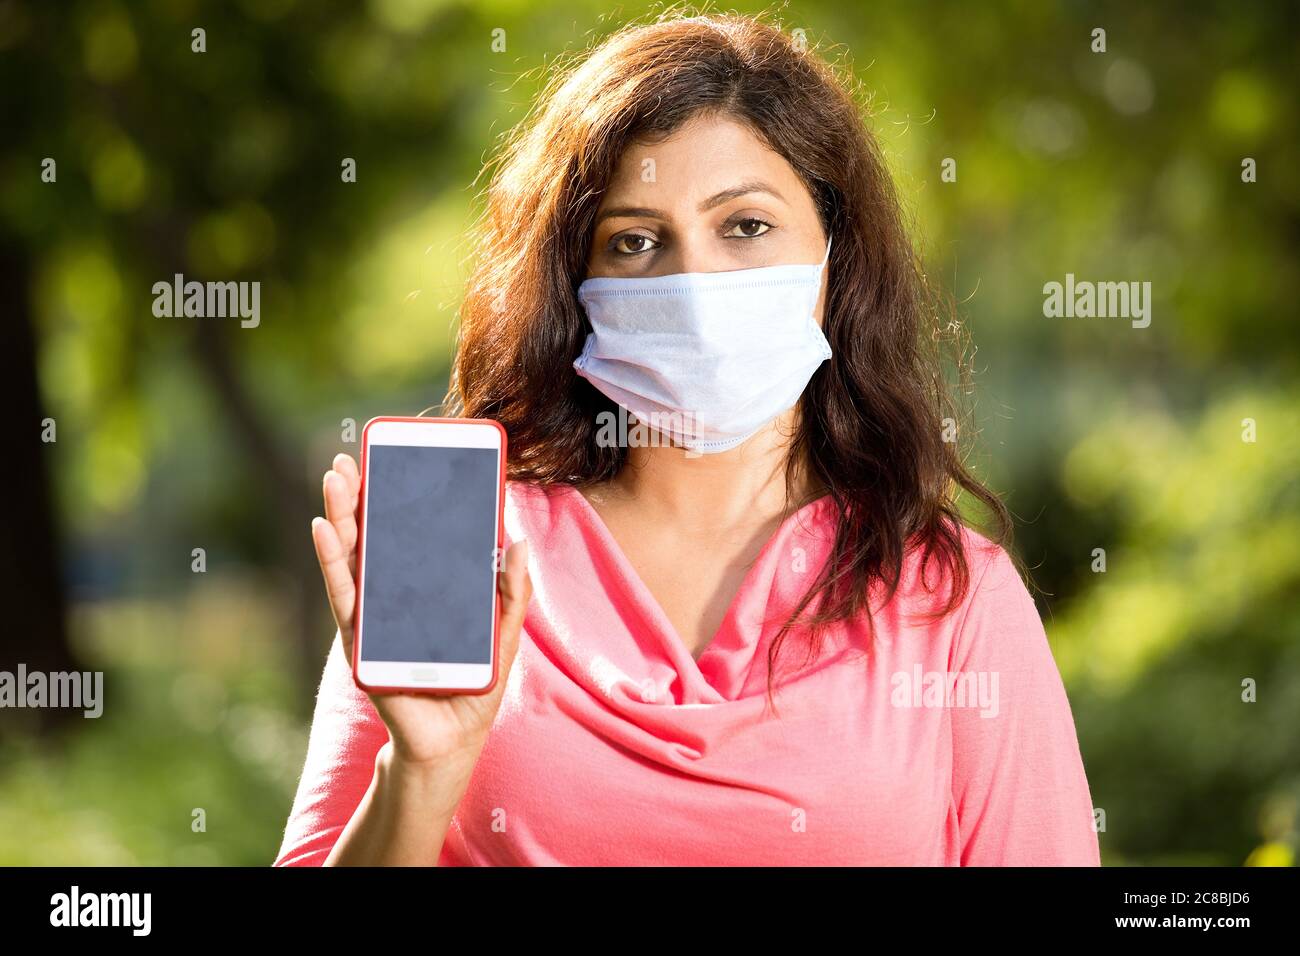 Mid adult woman showing mobile screen at park outdoor Stock Photo